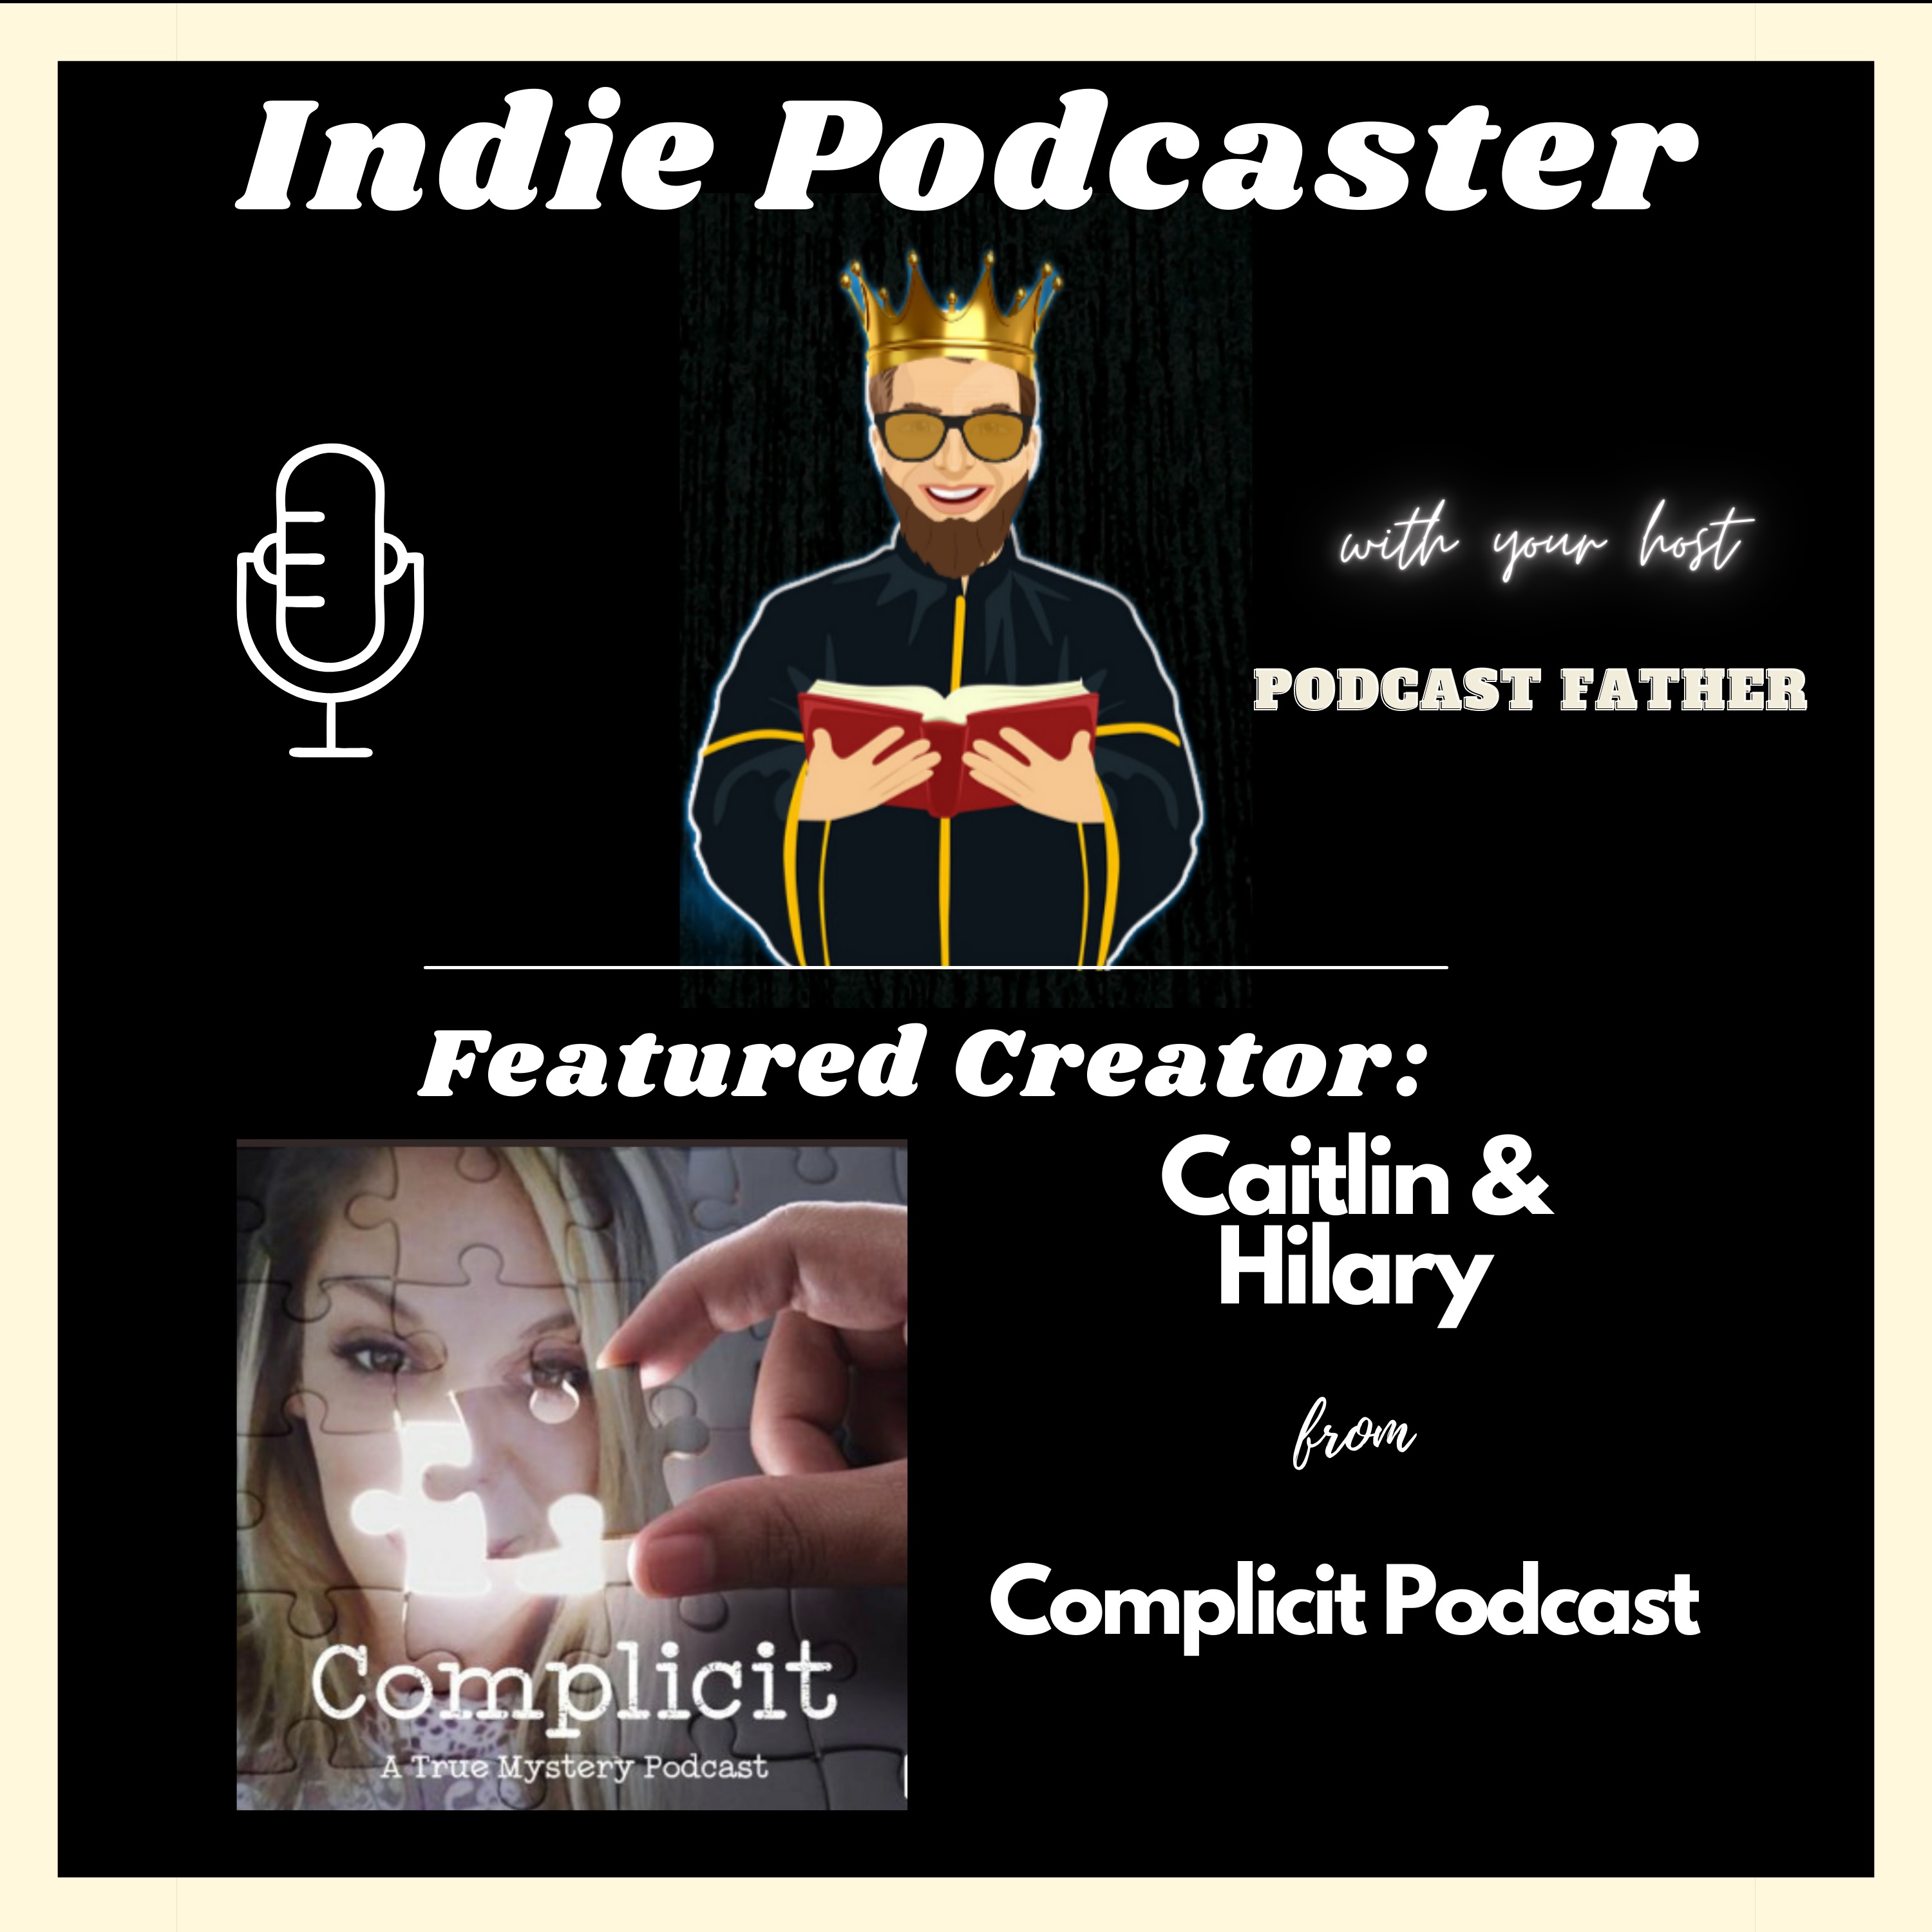 Caitlin and Hilary from Complicit Podcast Image